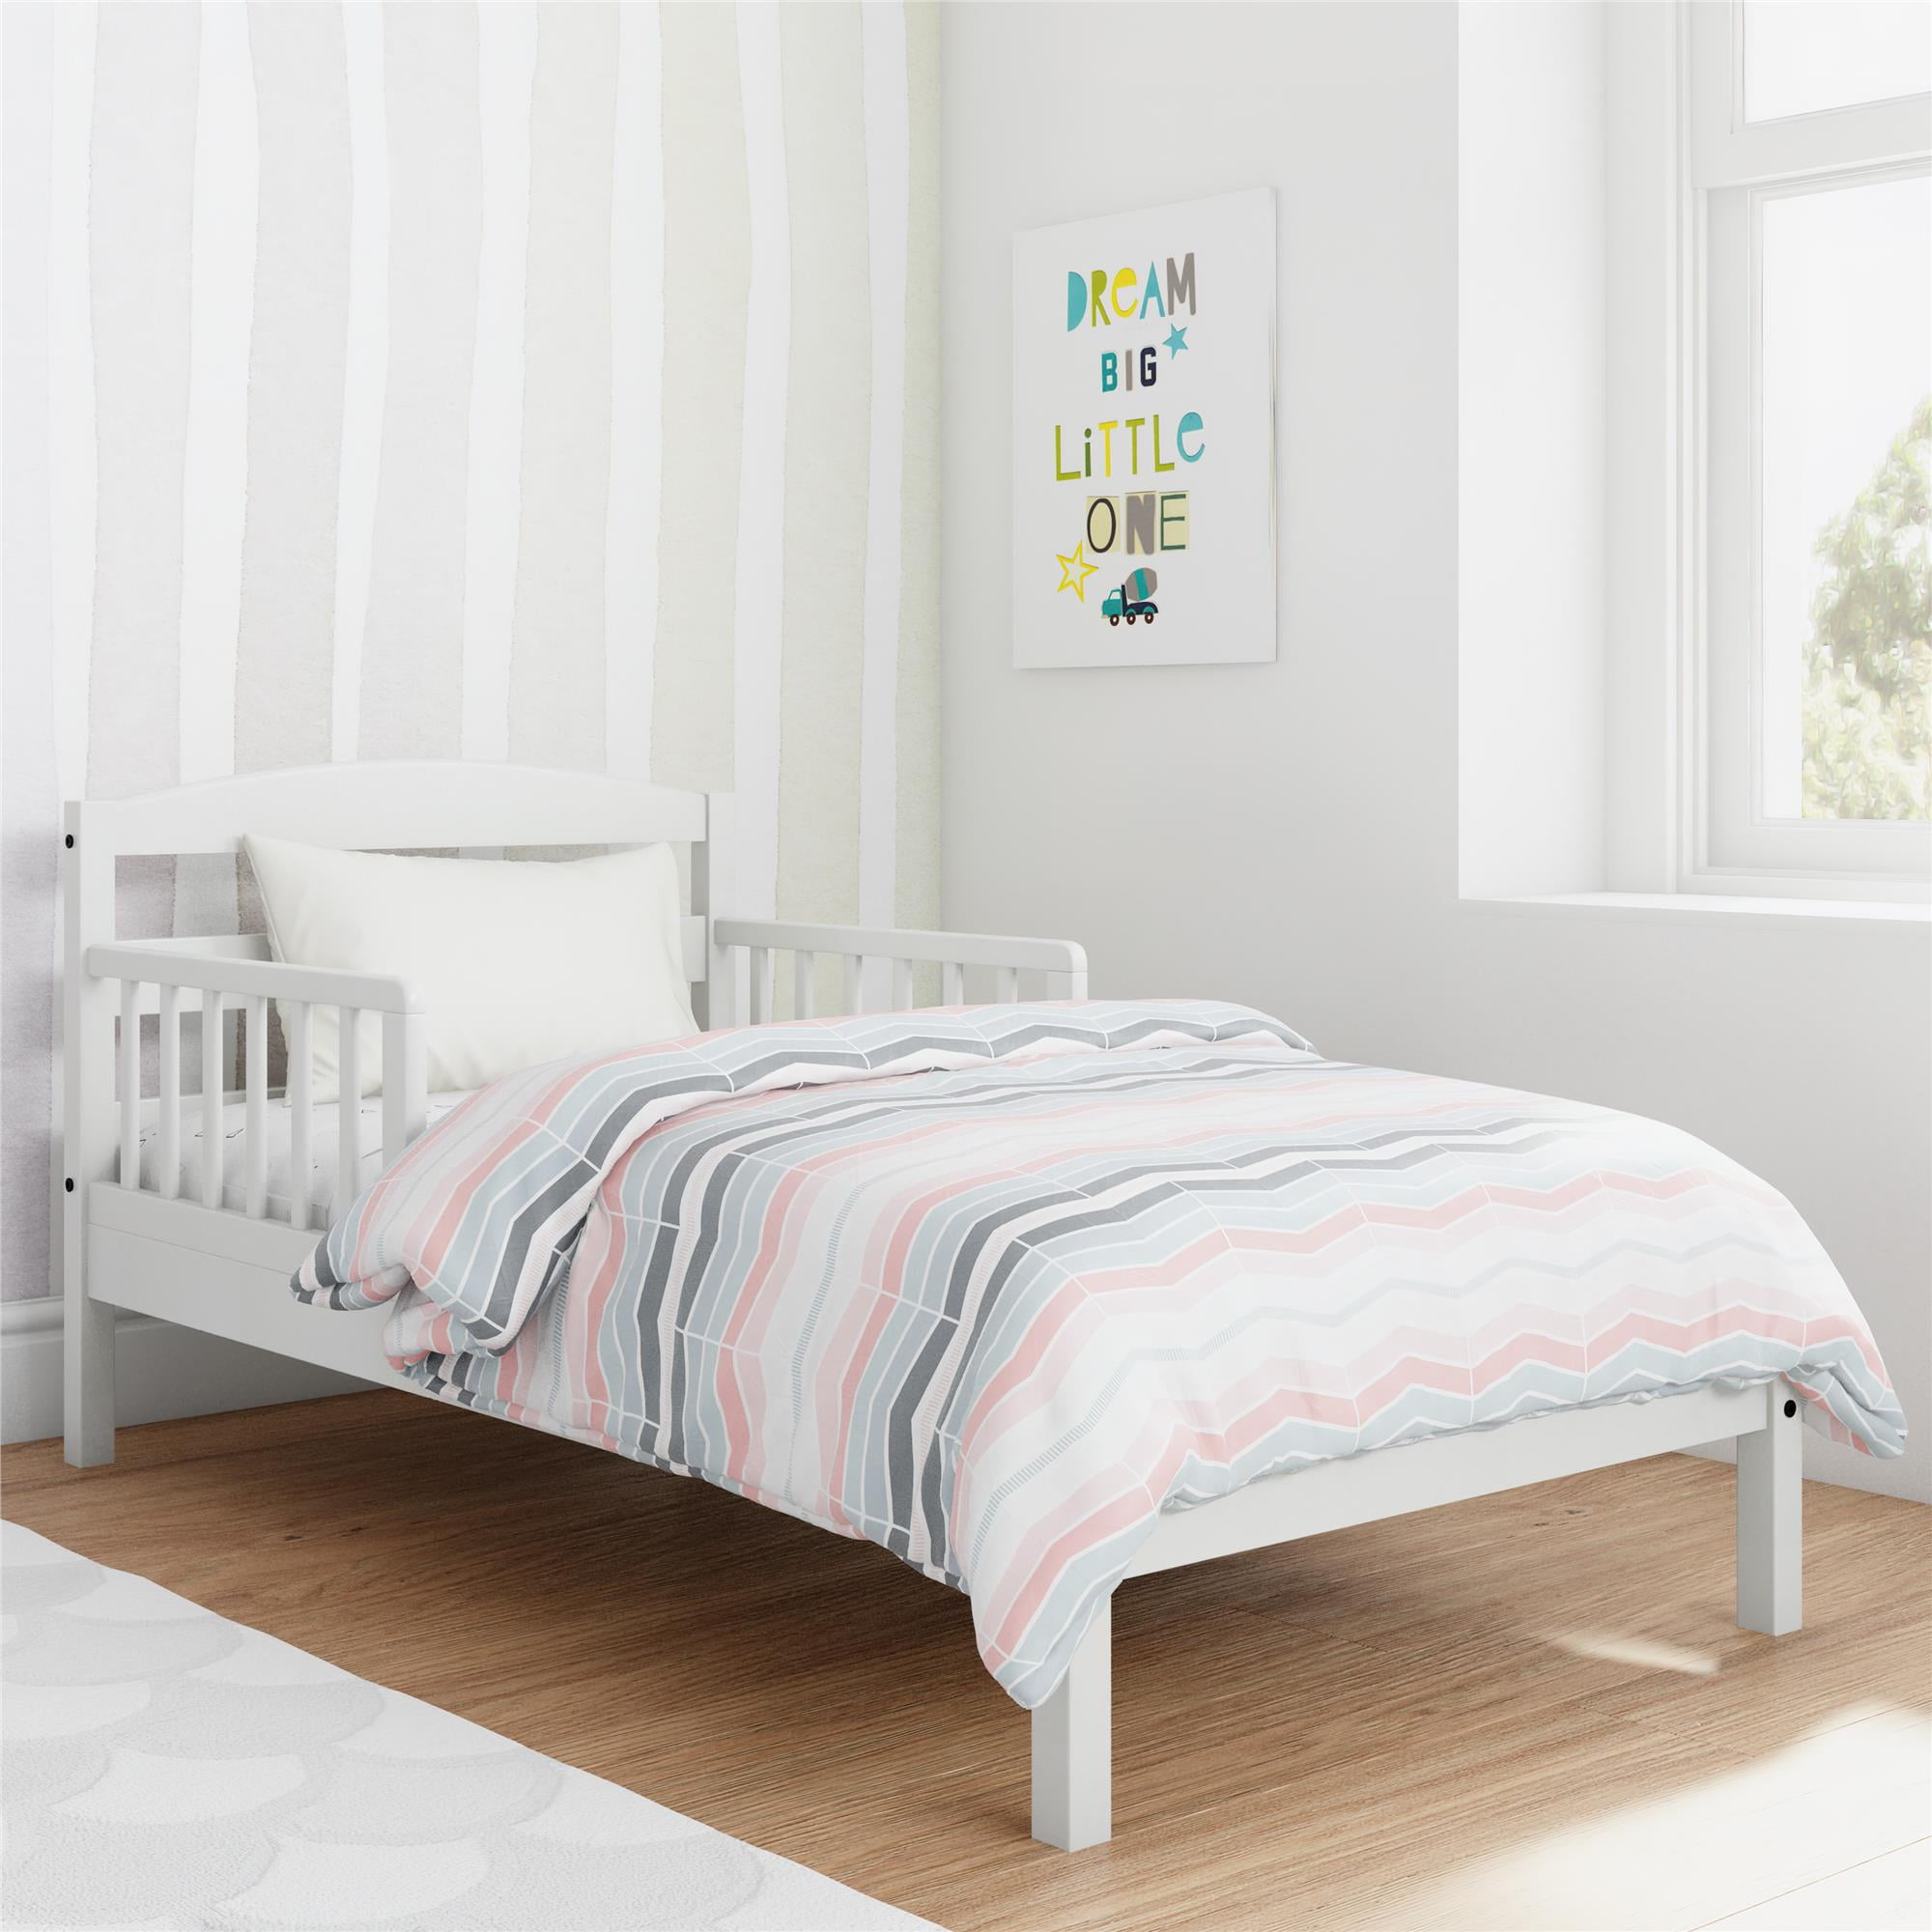 Baby Relax Jackson Kids Wood Toddler Bed with Safety Guardrails, White